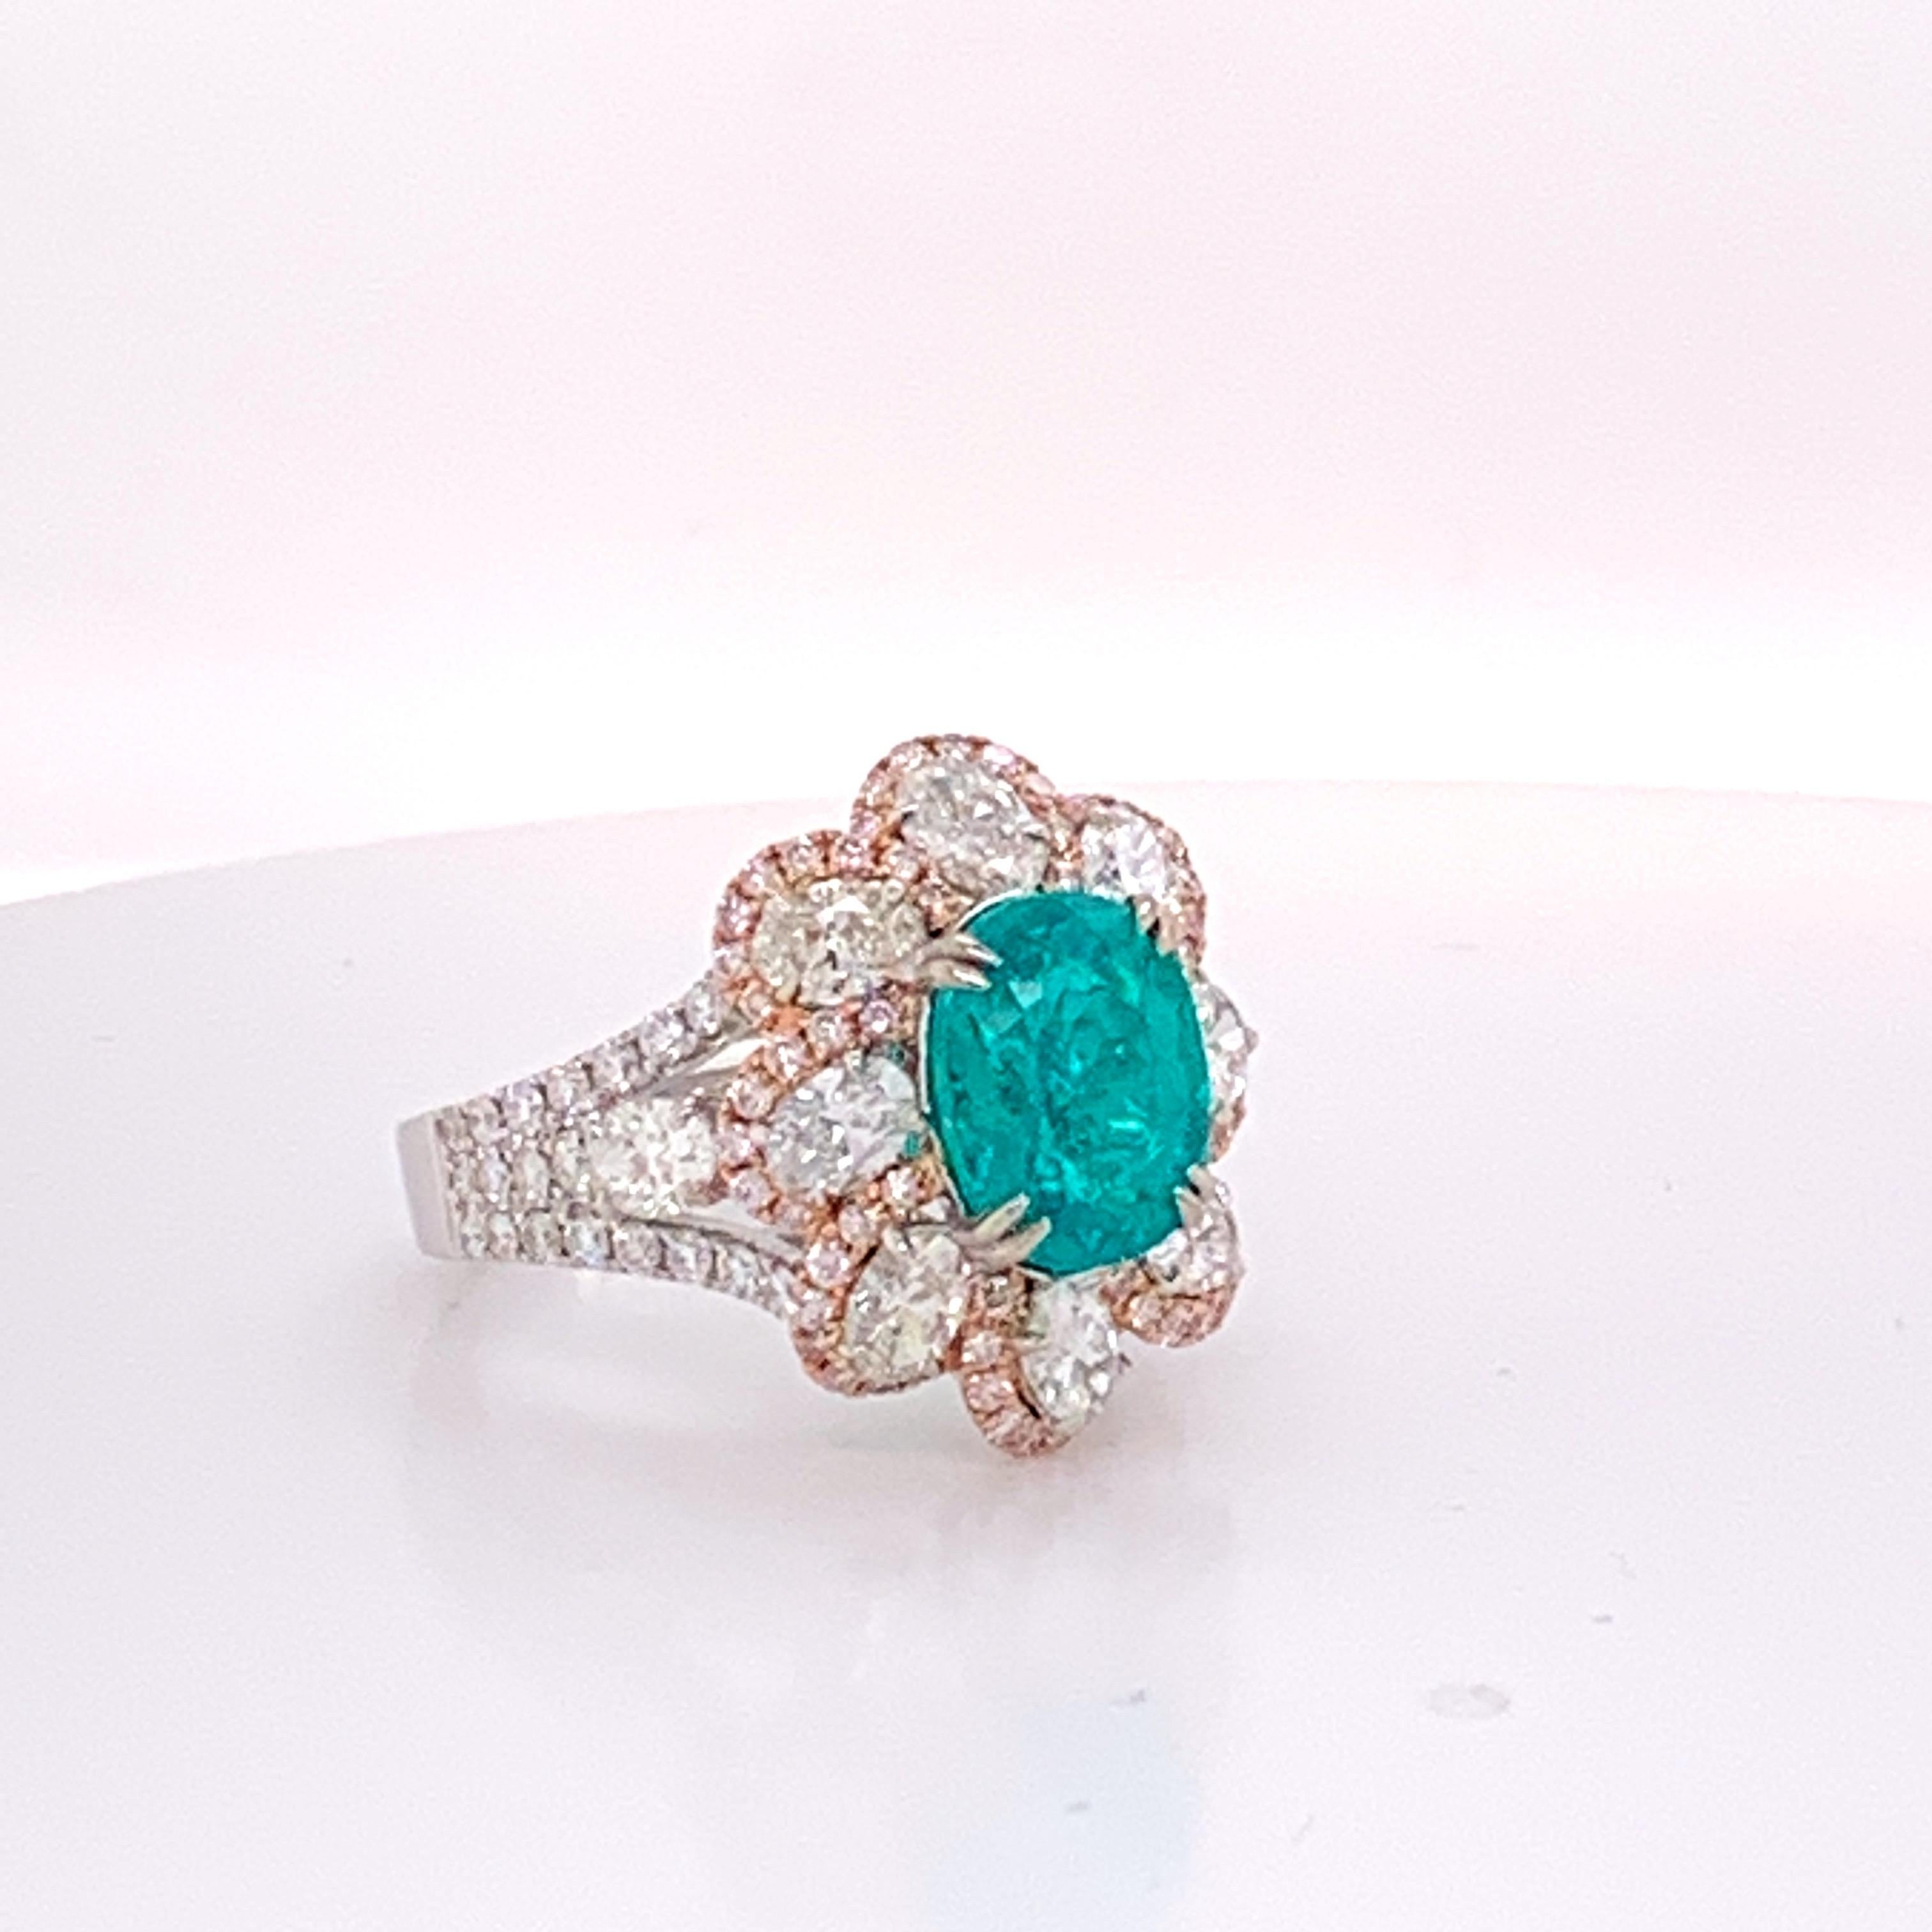 Natural Brazilian Paraiba Region Cooper Bearing swimming pool blue neon blue Tourmaline is well cut oval Stone.
The stone is set with 2.11 Carat White and 0.49 Carat Pink diamonds.The Rng is one of a kind and handcrafted.
The Ring is Sizable 7.